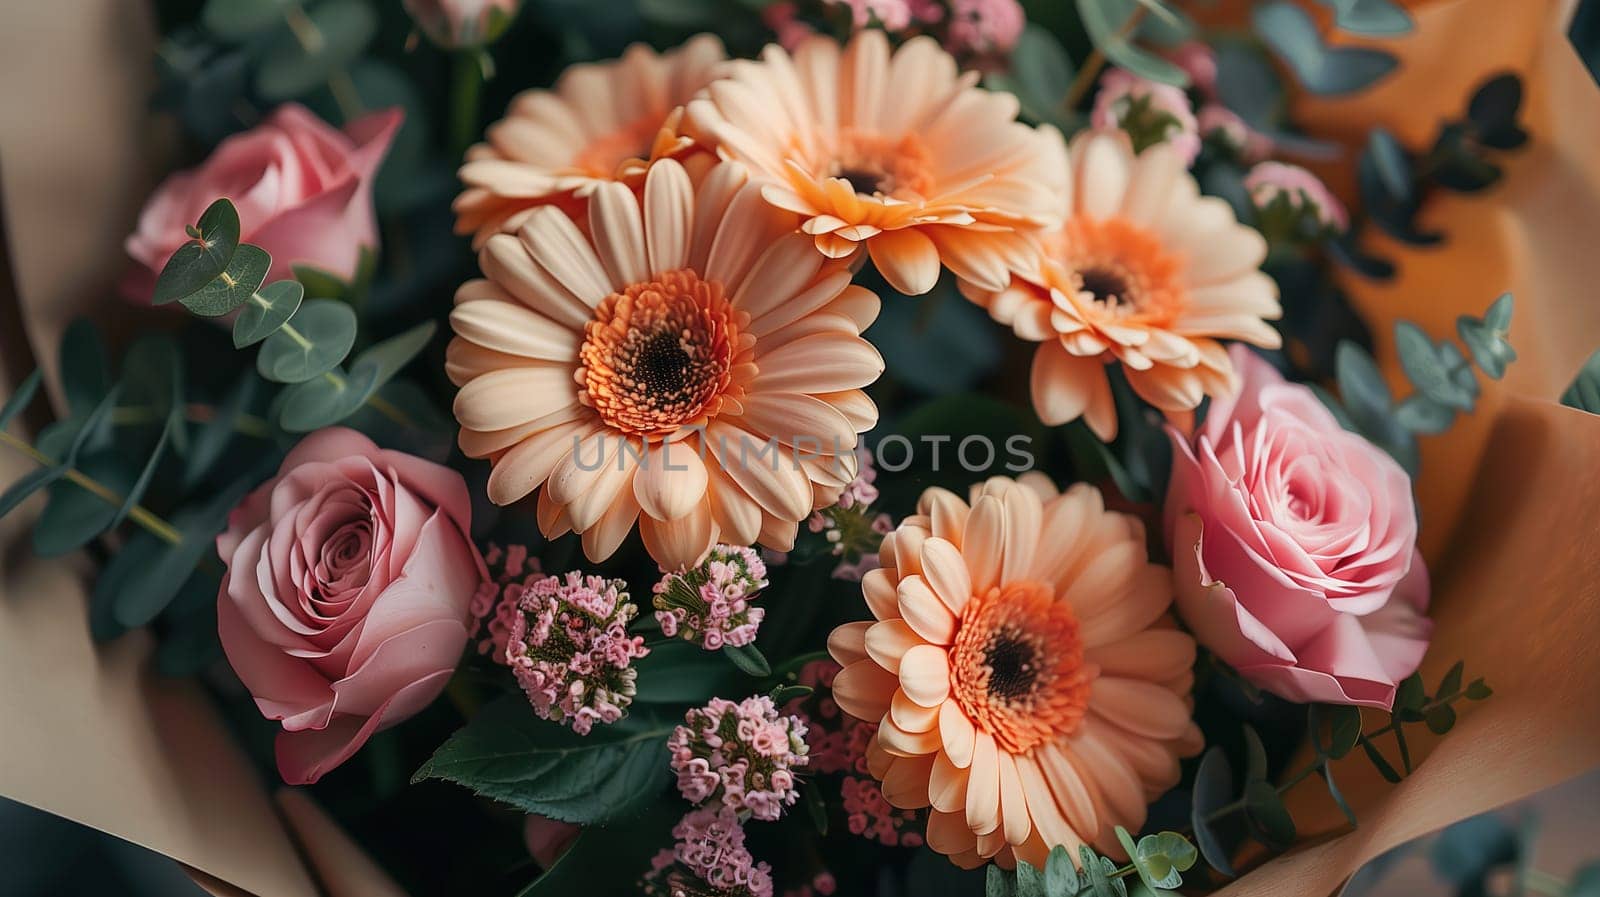 A bouquet of pink and orange flowers rests on top of a wooden table, showcasing the vibrant colors of the blooms against the neutral backdrop. The flowers are neatly arranged in a harmonious display, adding a touch of beauty to the room.